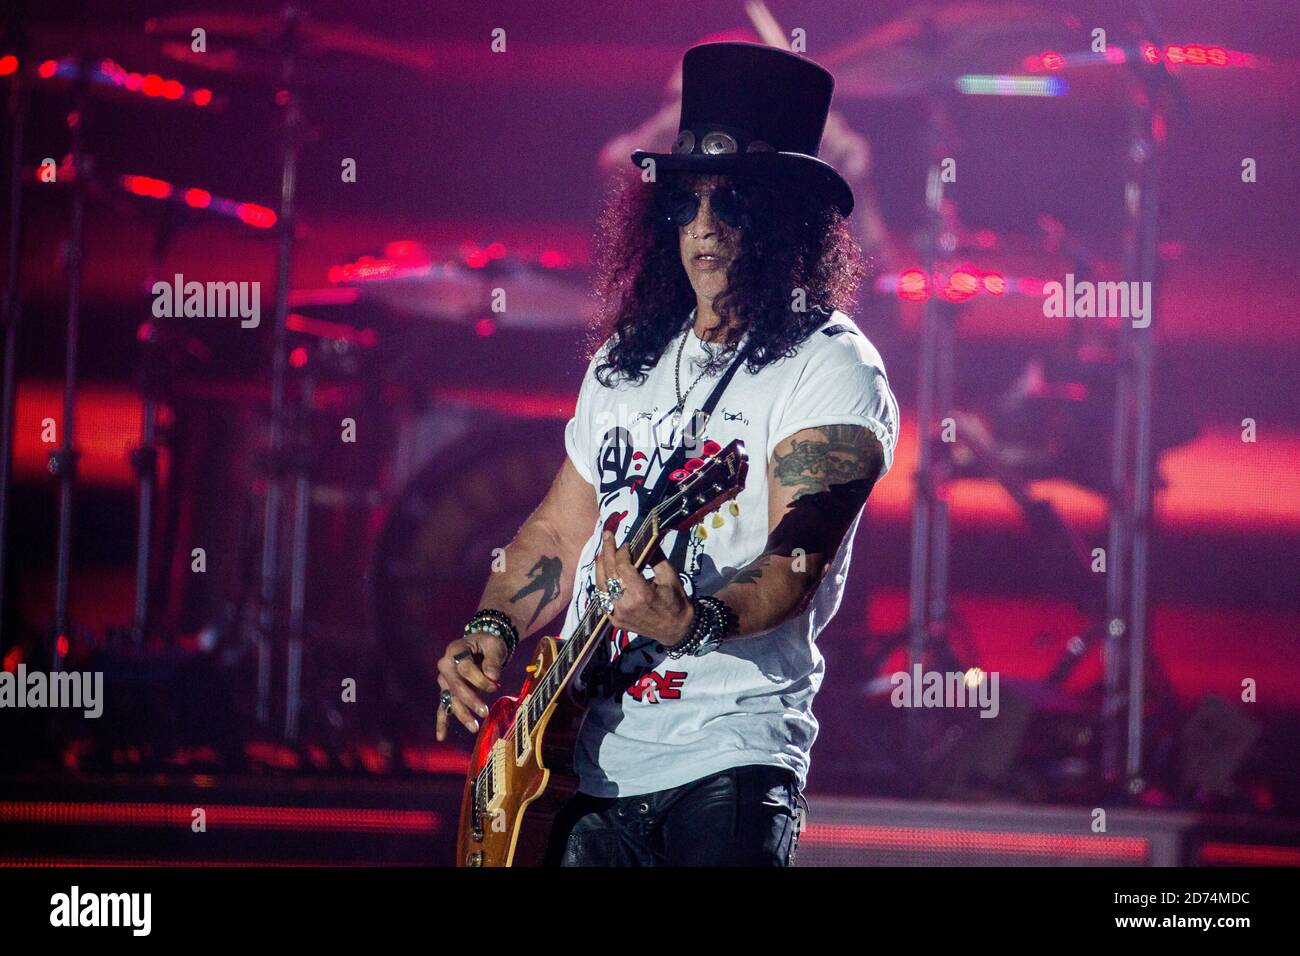 Slash Guns N Roses High Resolution Stock Photography and Images - Alamy